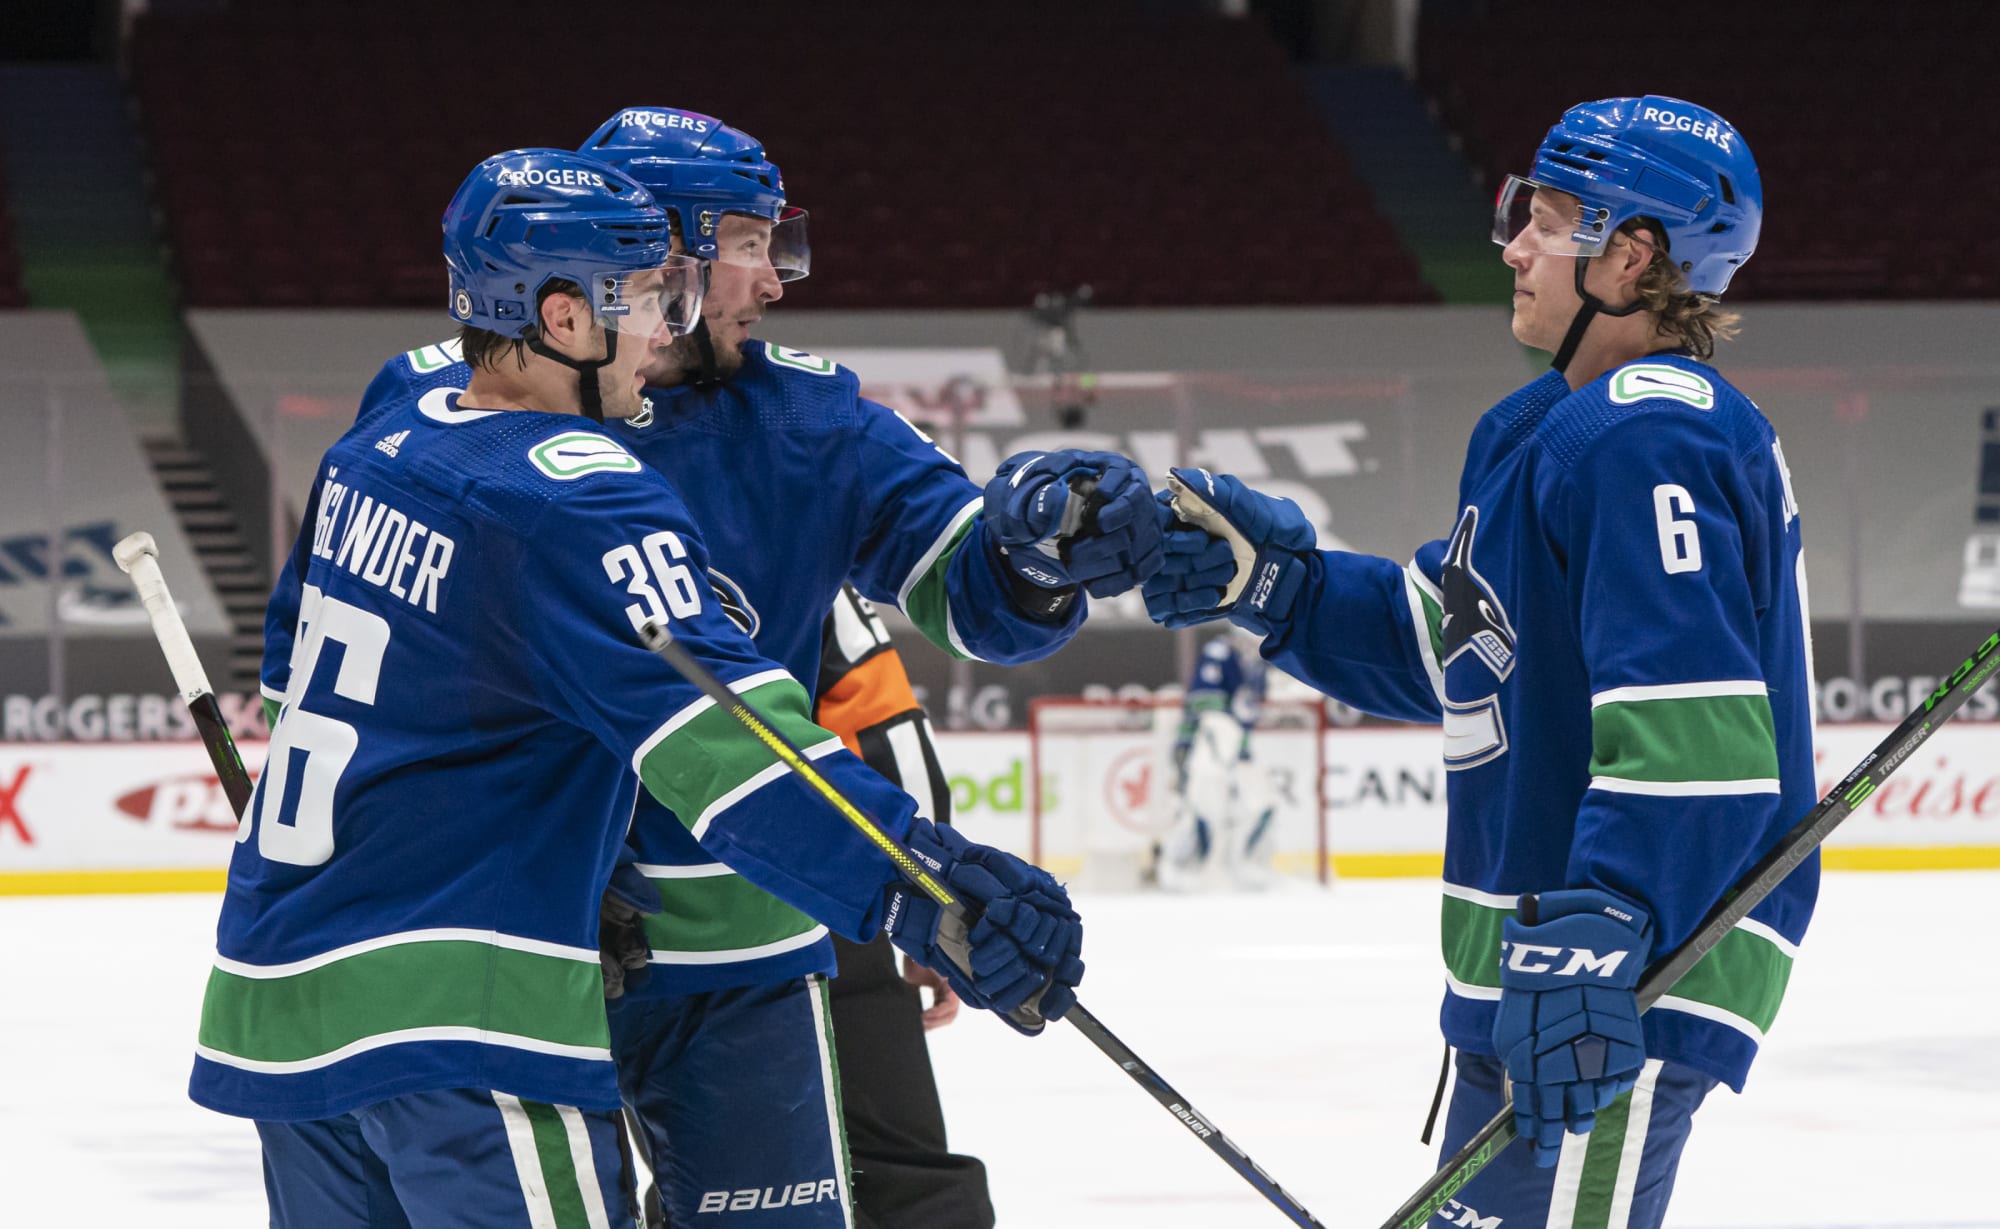 Canucks 82game schedule released for 202122 season